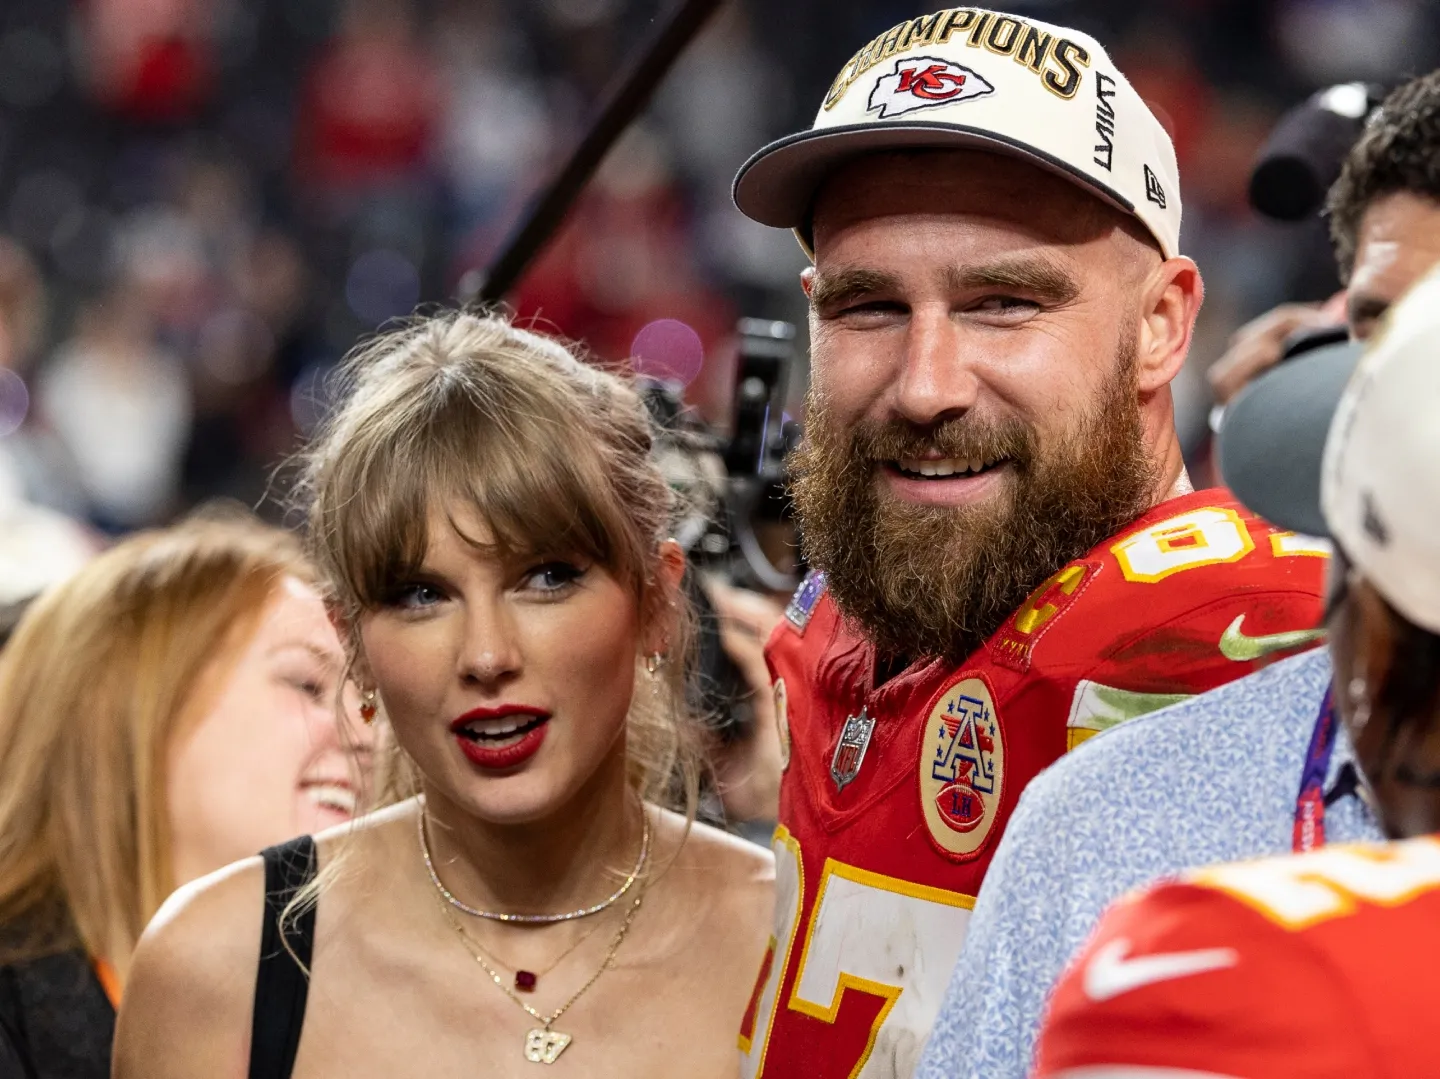 Taylor Swift struggles to cope with distance from Travis Kelce, insiders reveal: Swift is trying to prioritize time with Kelce